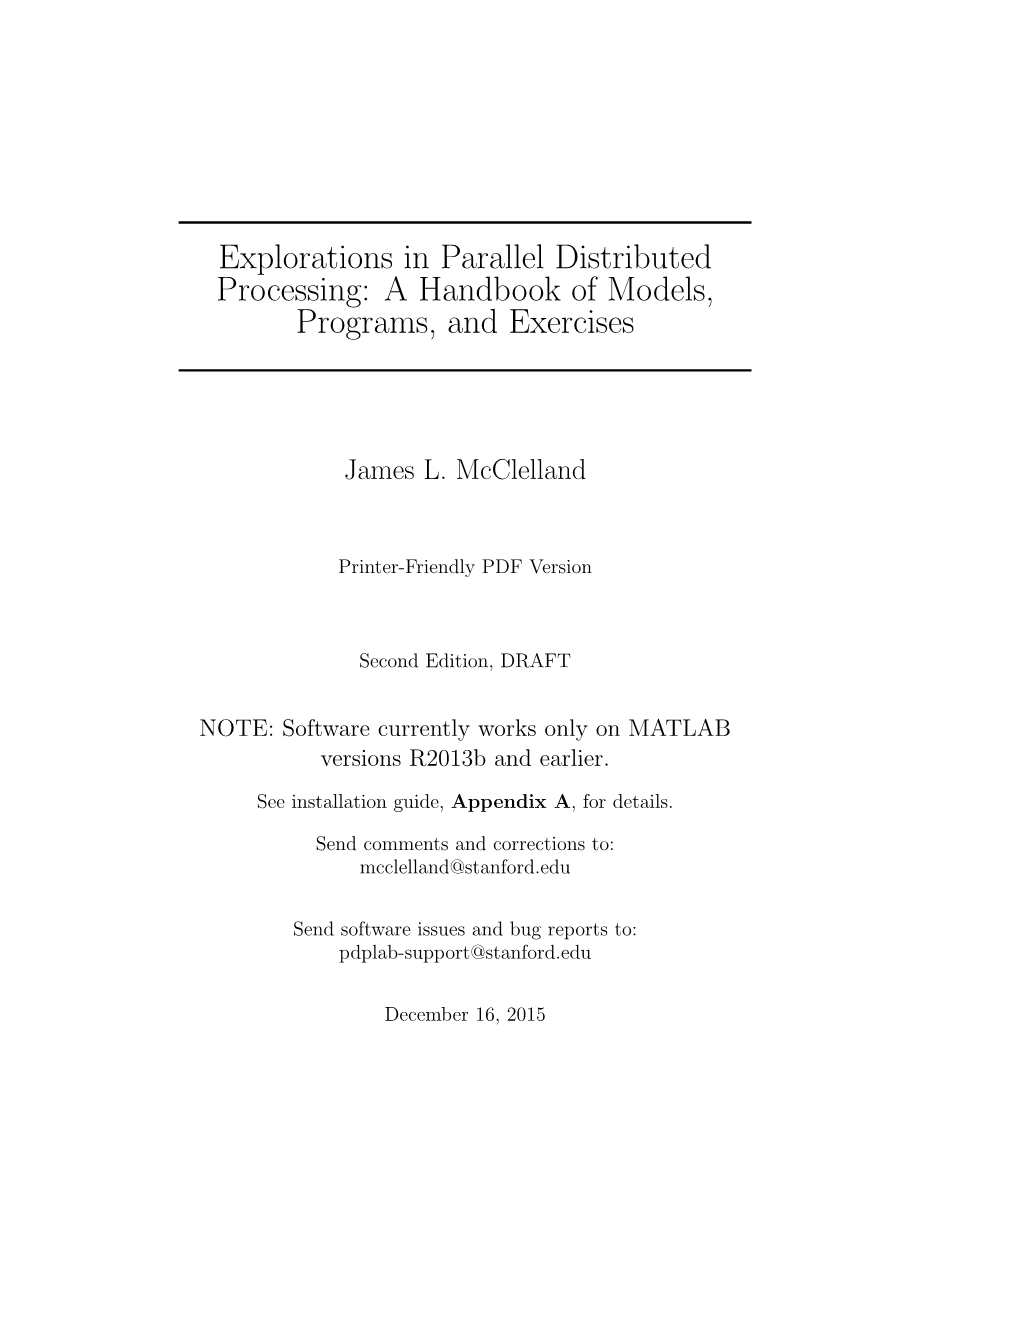 Explorations in Parallel Distributed Processing: a Handbook of Models, Programs, and Exercises